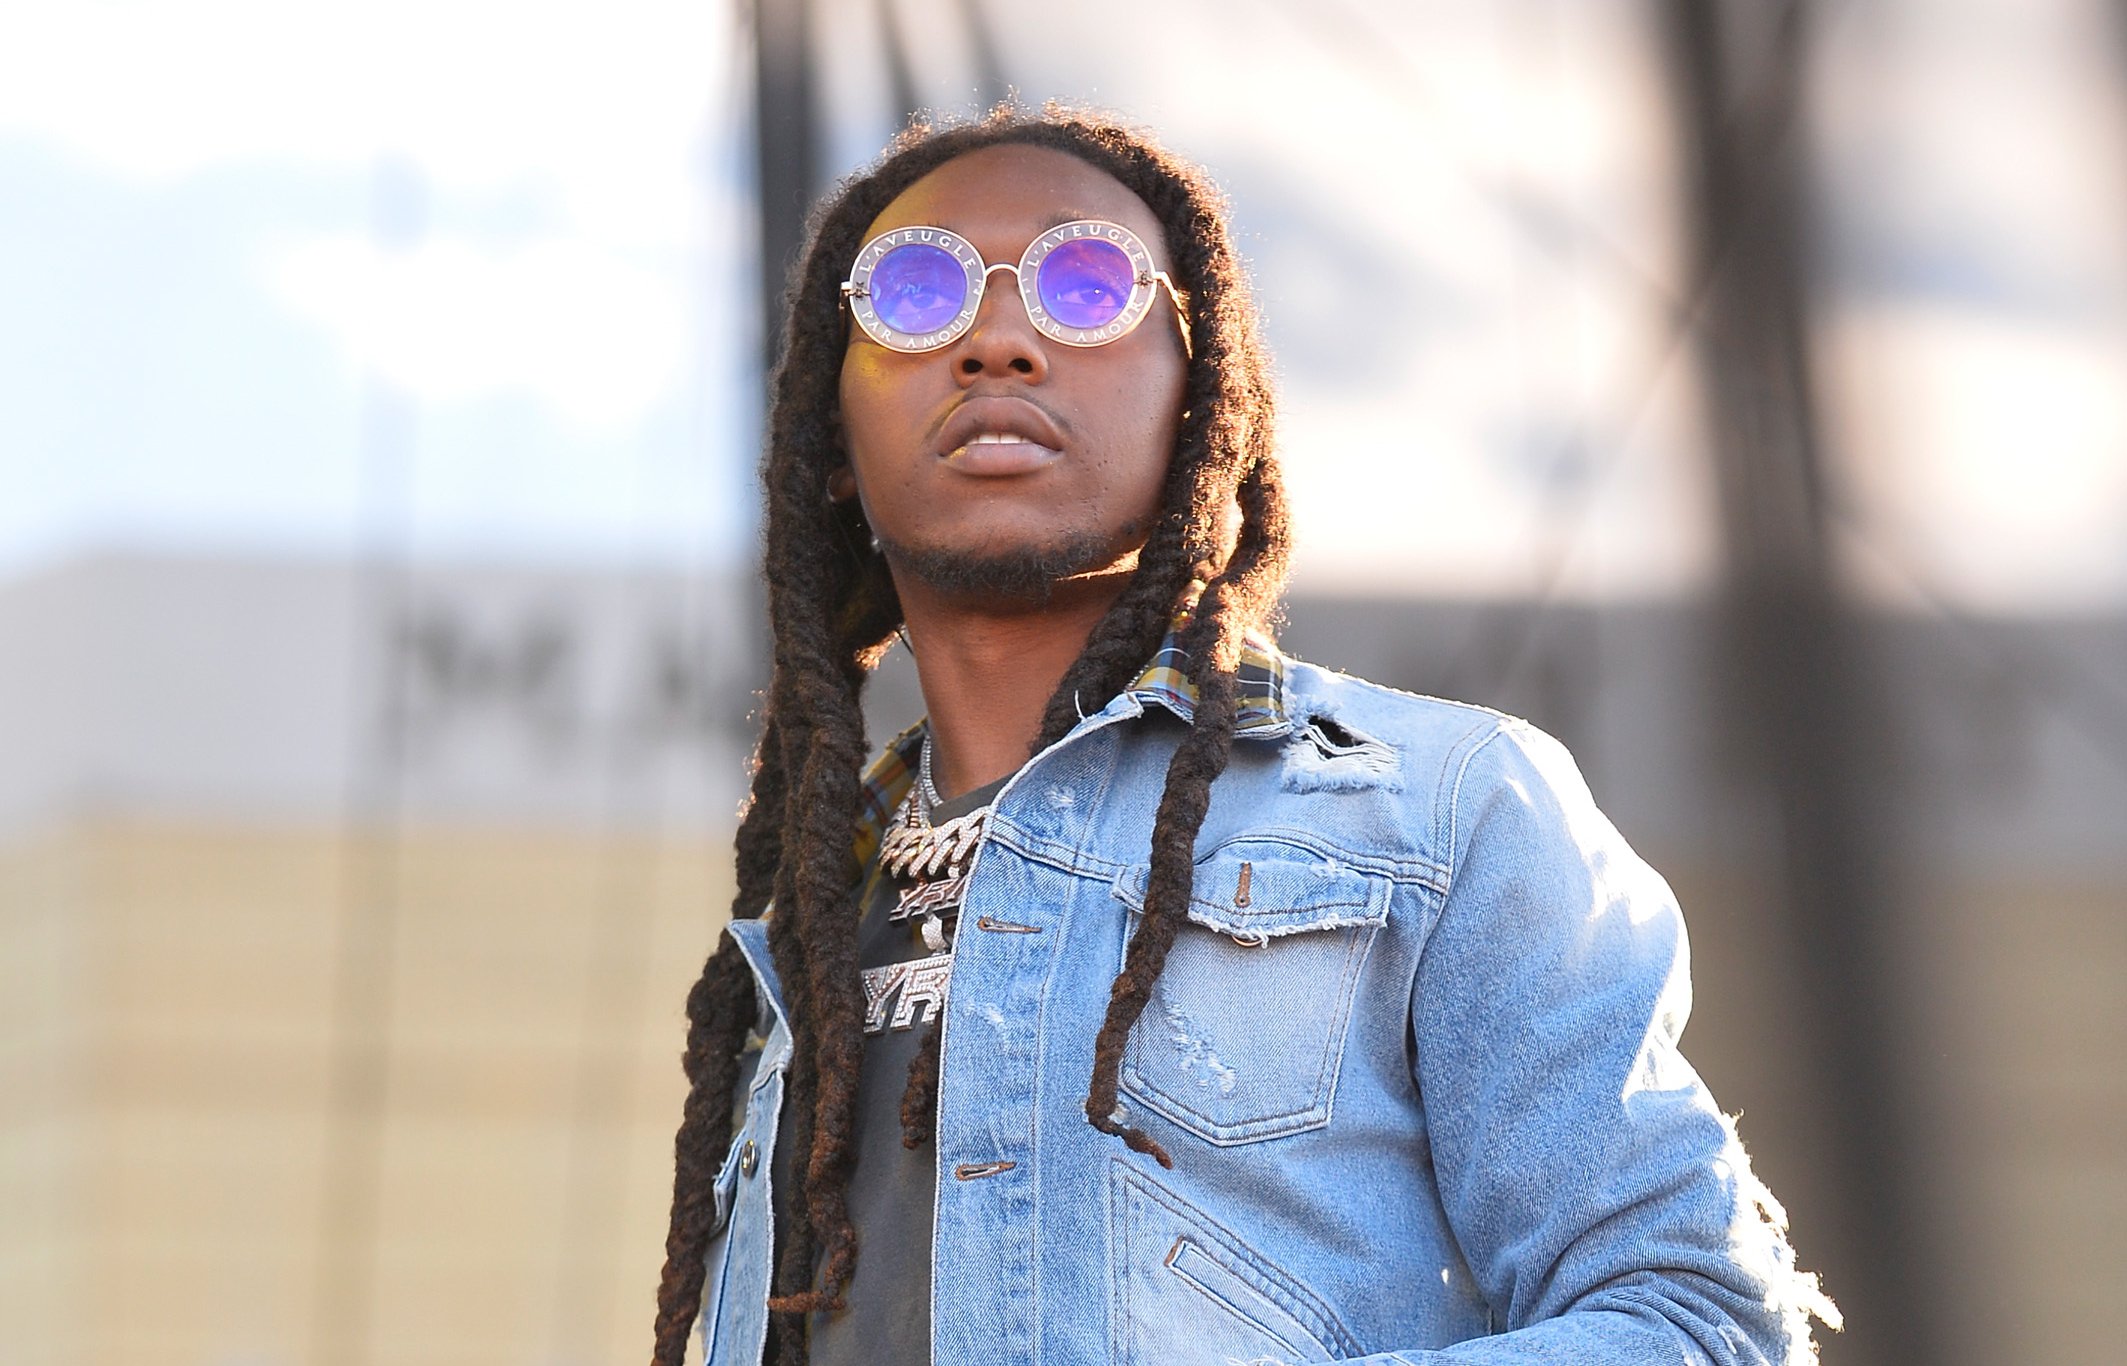 Takeoff of Migos performs onstage during the Daytime Village Presented by Capital One at the 2017 HeartRadio Music Festival at the Las Vegas Village on September 23, 2017 in Las Vegas, Nevada